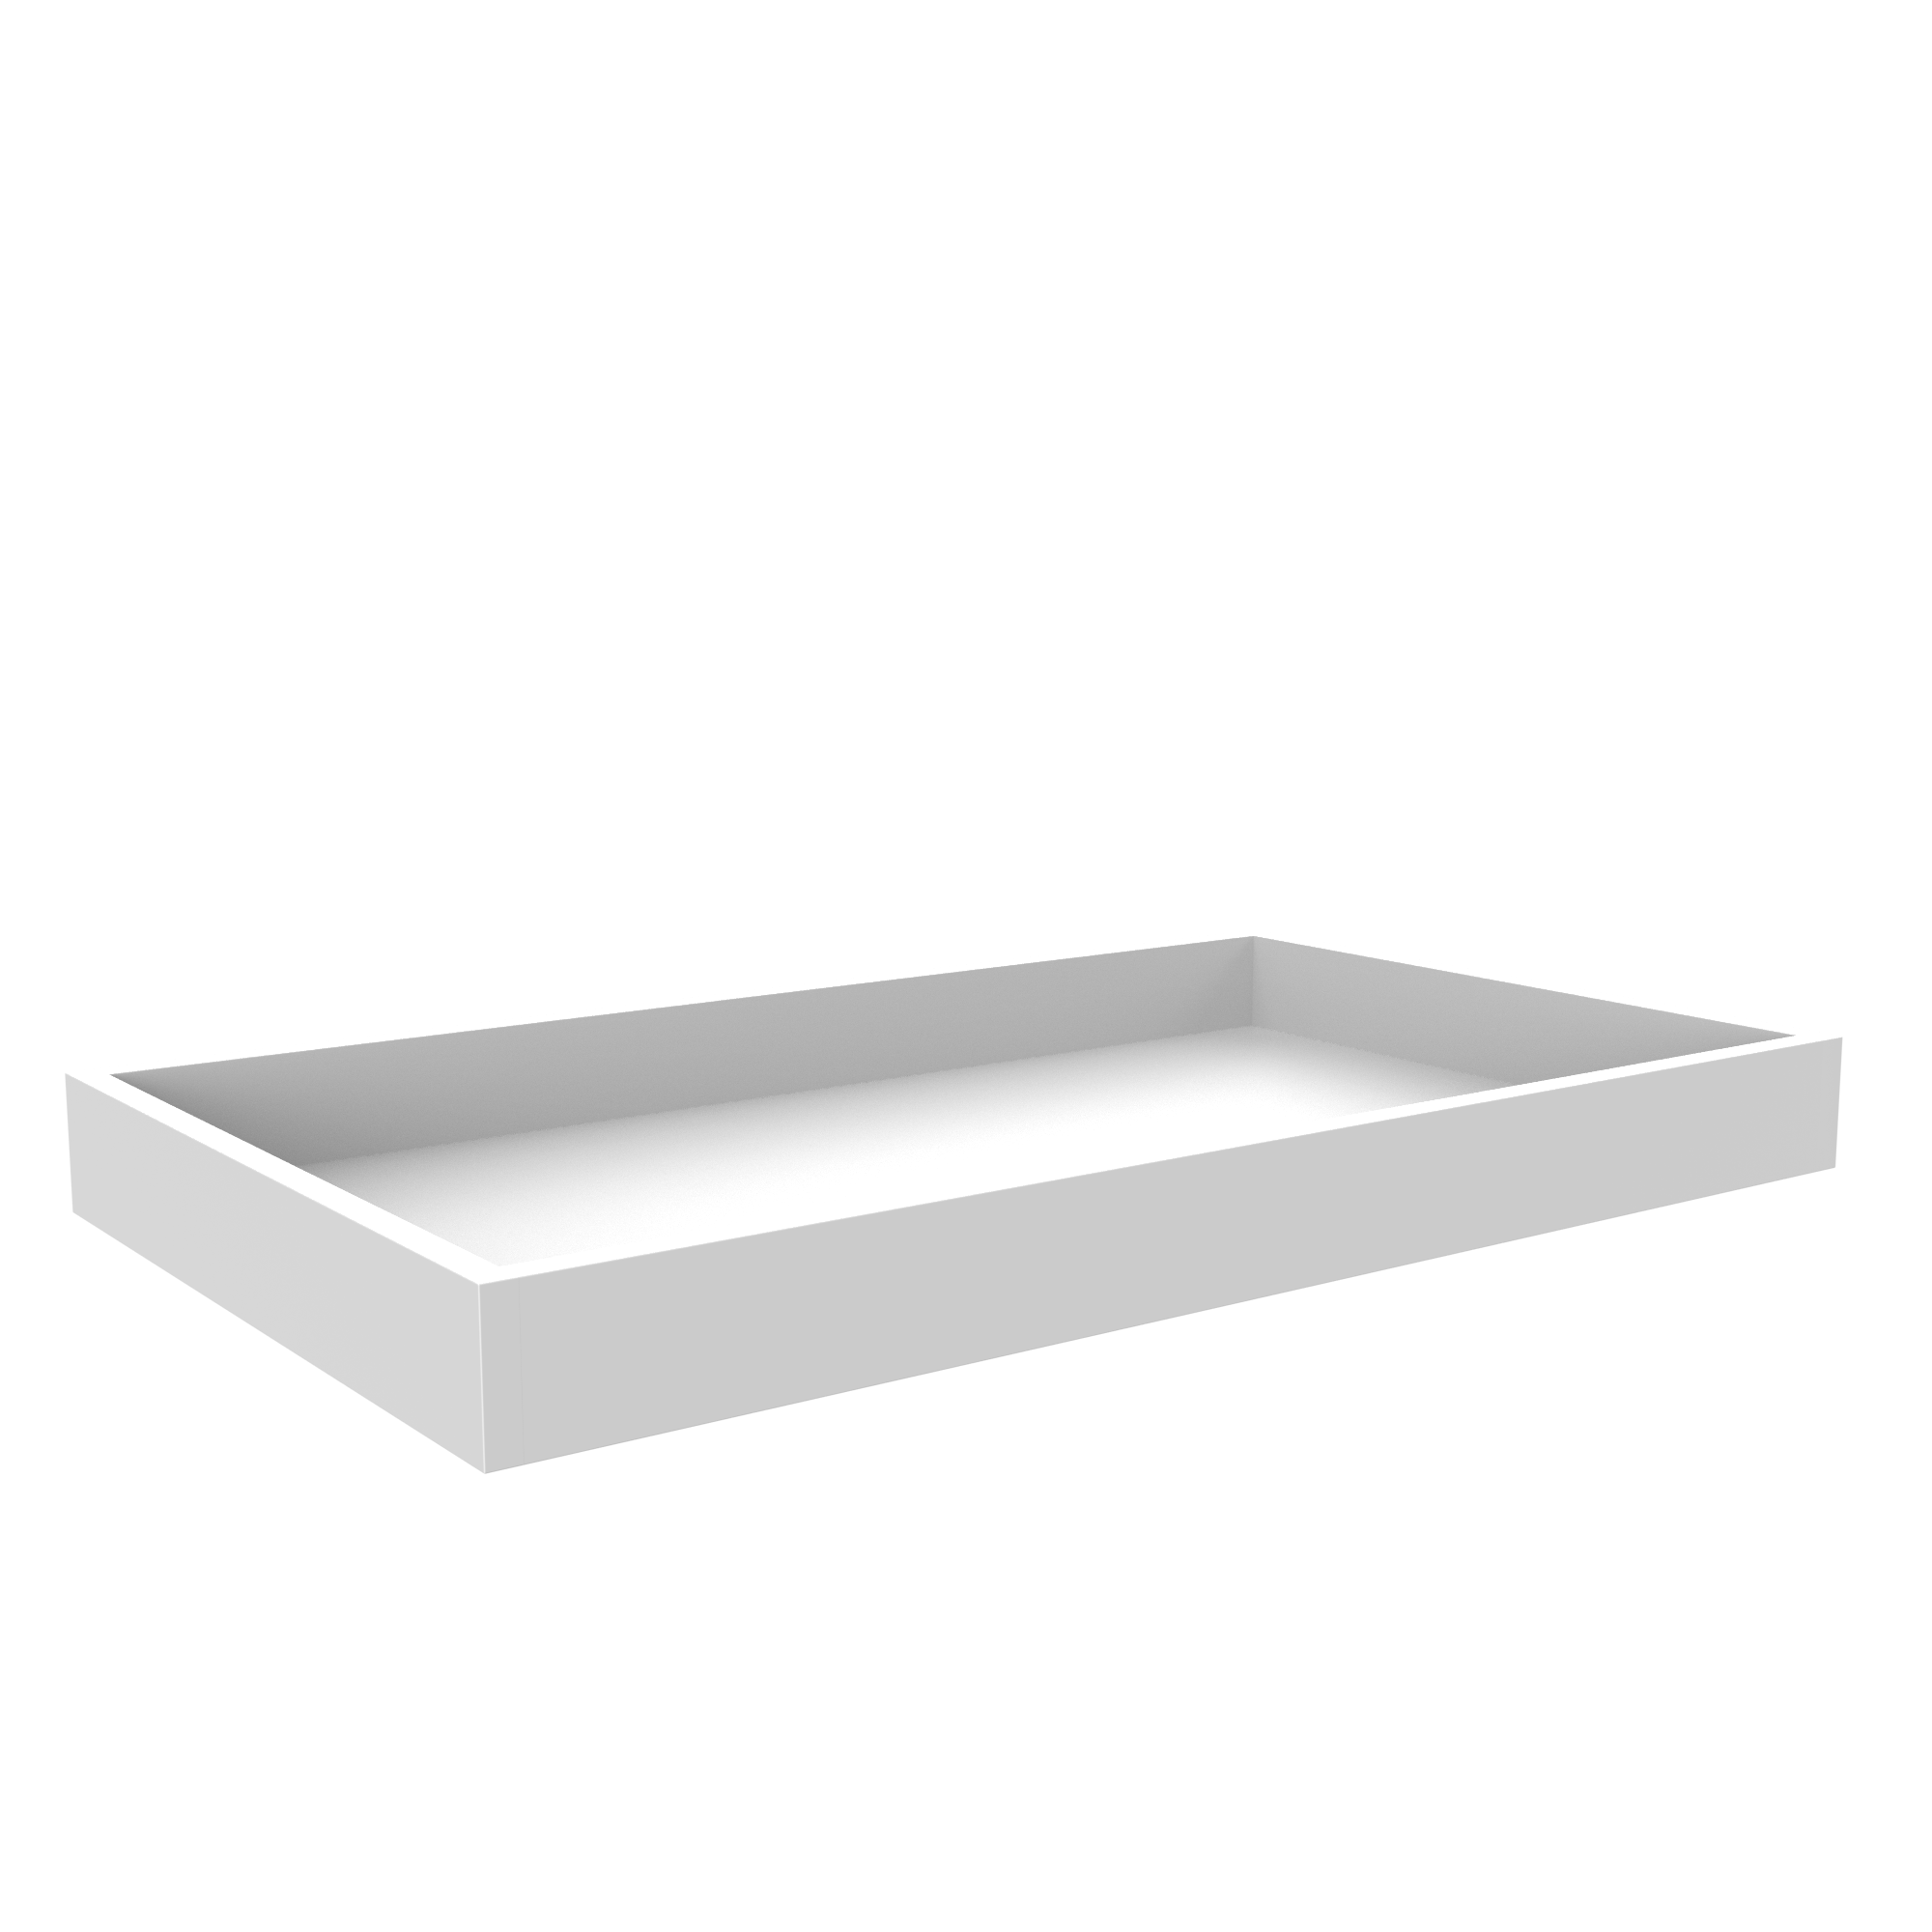 Roll Out Tray for Cabinets - Fits B36 - Aria White Shaker Cabinet - RTA